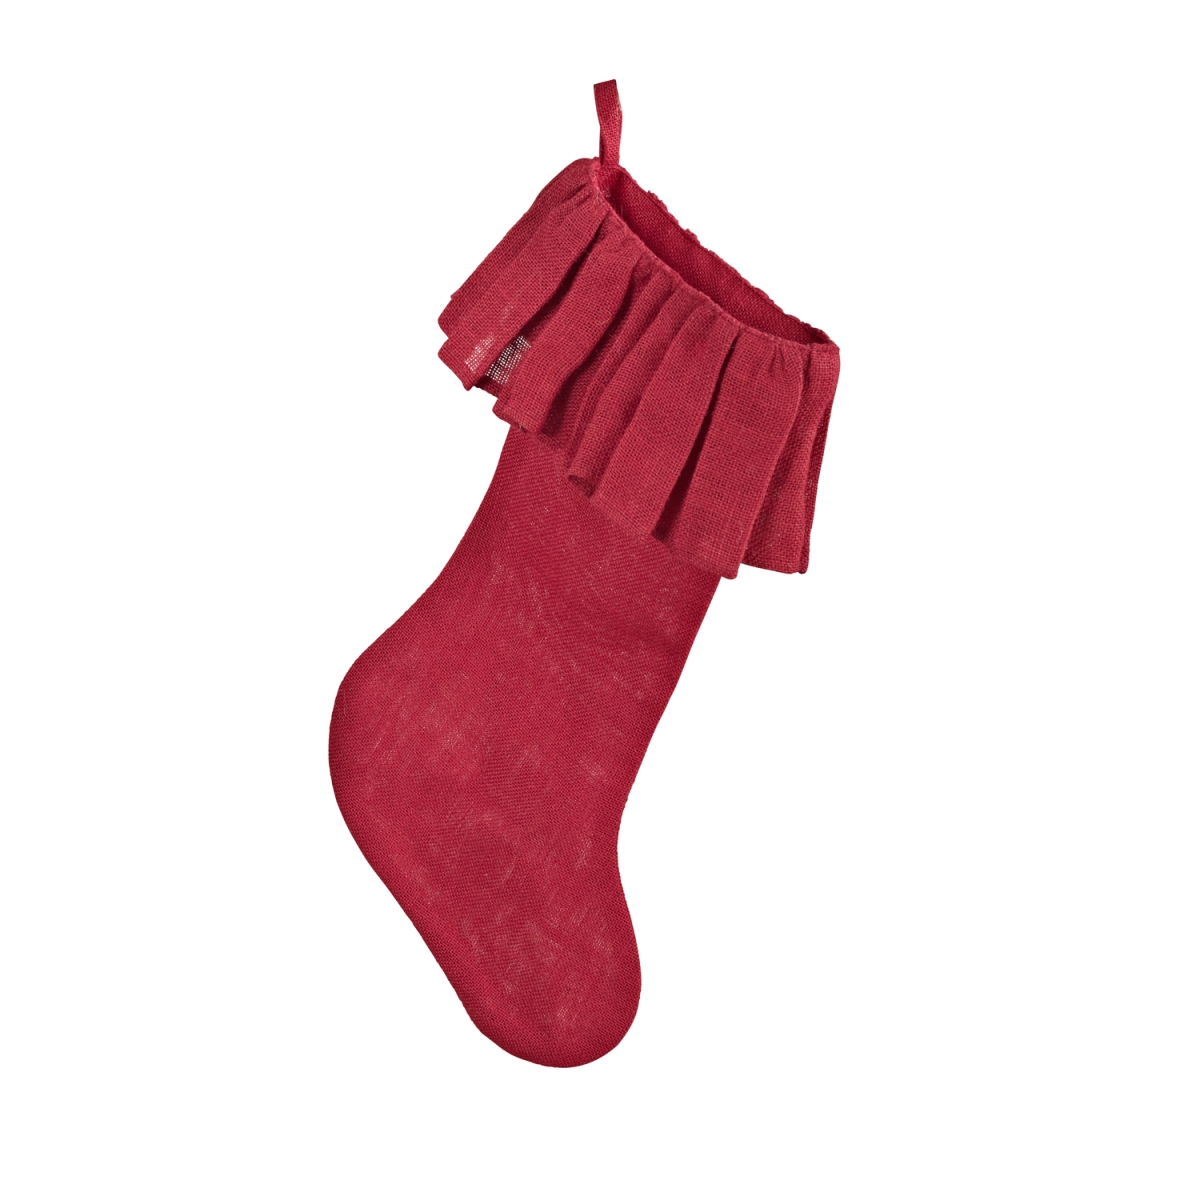 9613.r1319 13 X 19 In. Jute Christmas Stocking - Red